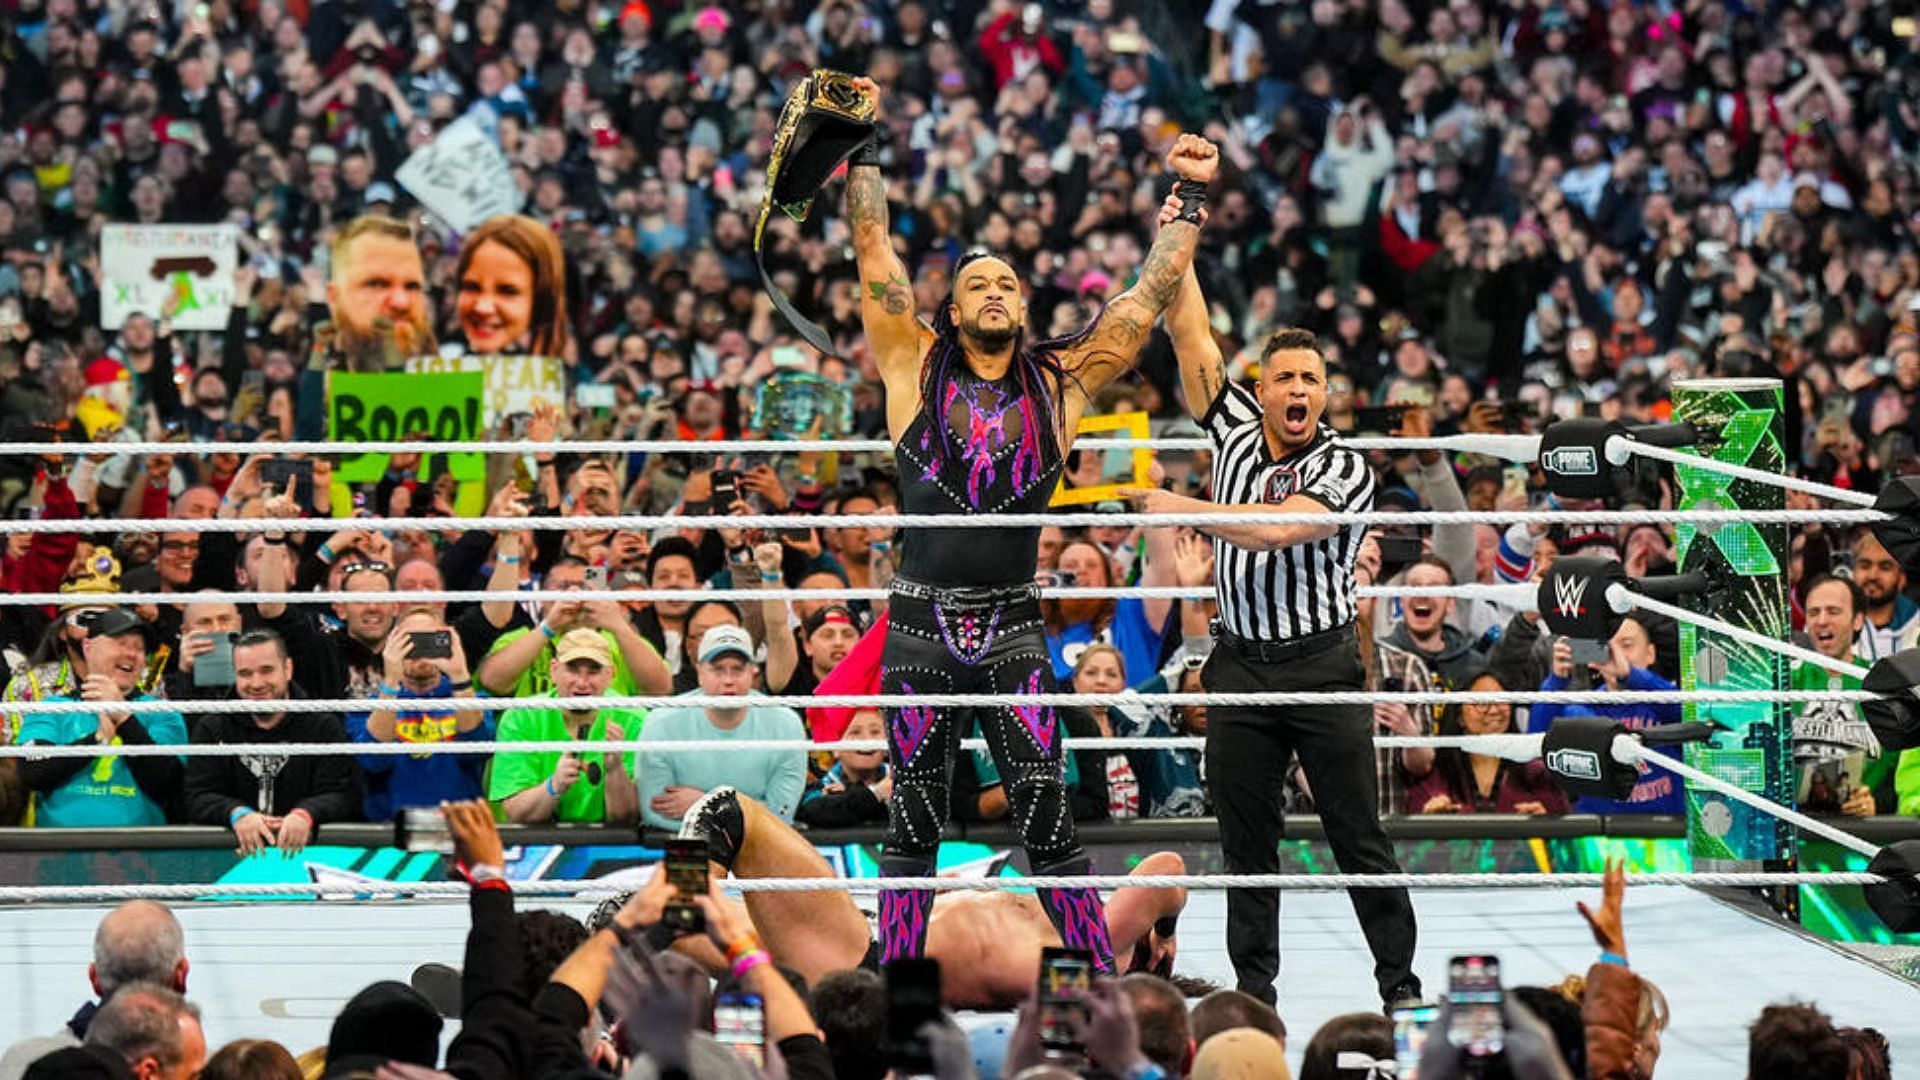 Priest cashed in his Money in the Bank contract at WrestleMania.